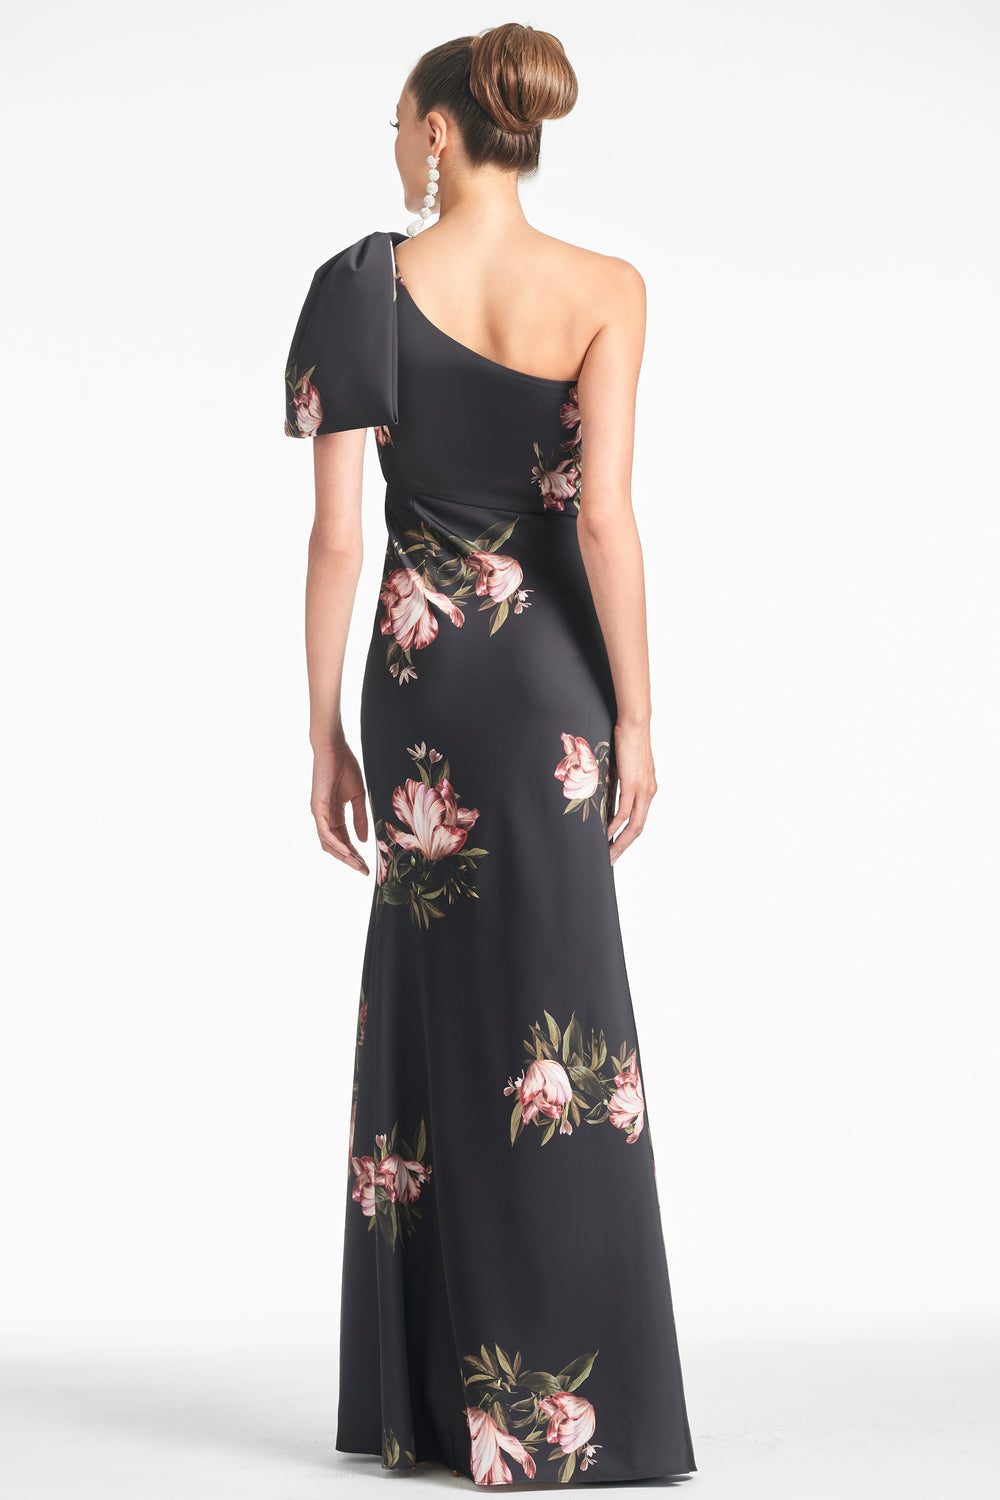 Sachin & Babi Floral One Shoulder With Bow